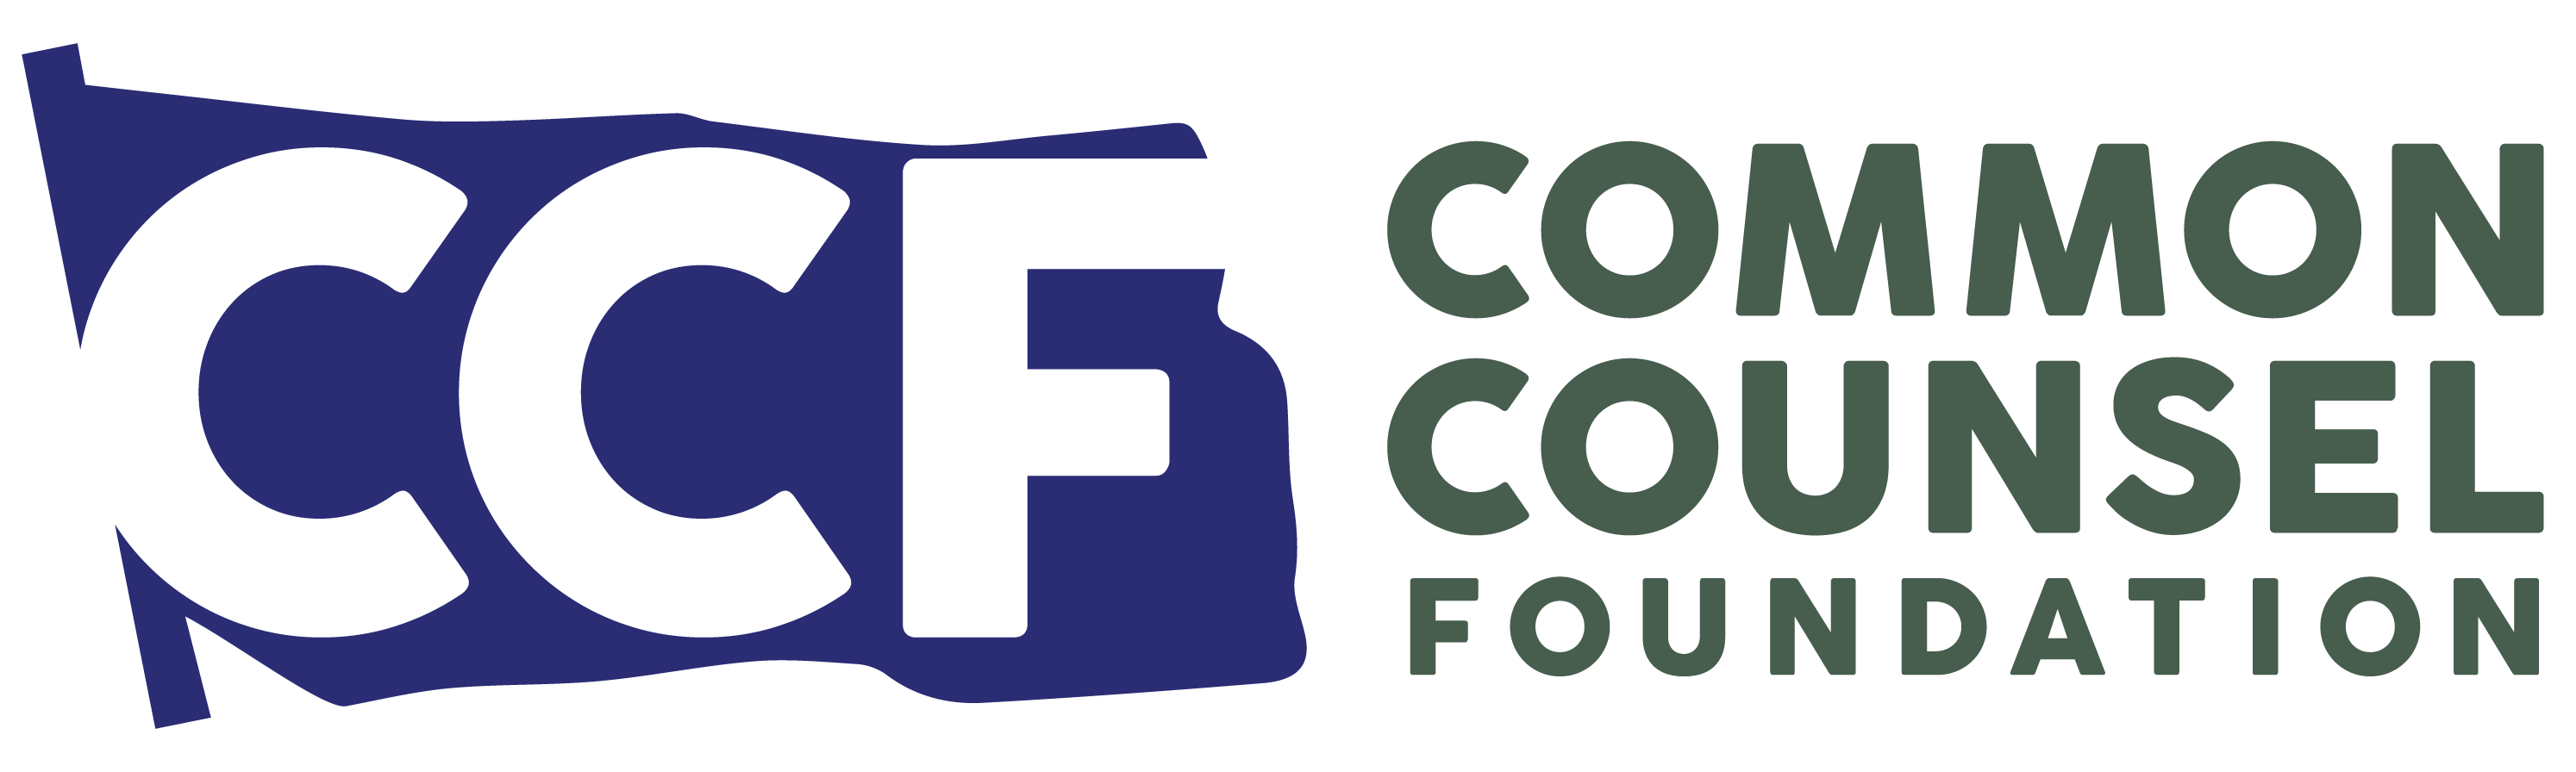 Common Counsel Foundation